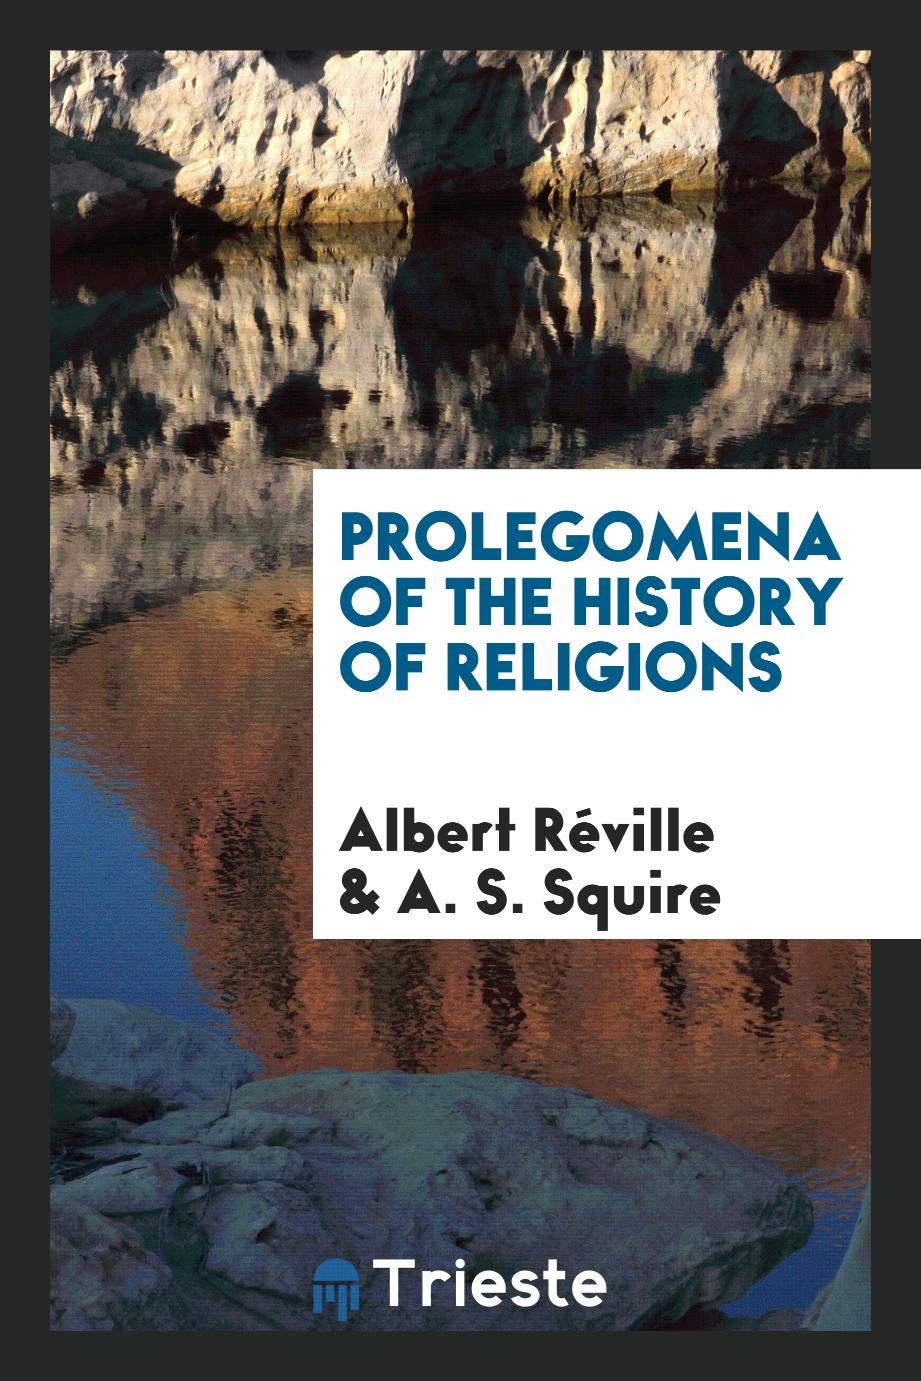 Albert Réville, A. S. Squire - Prolegomena of the history of religions